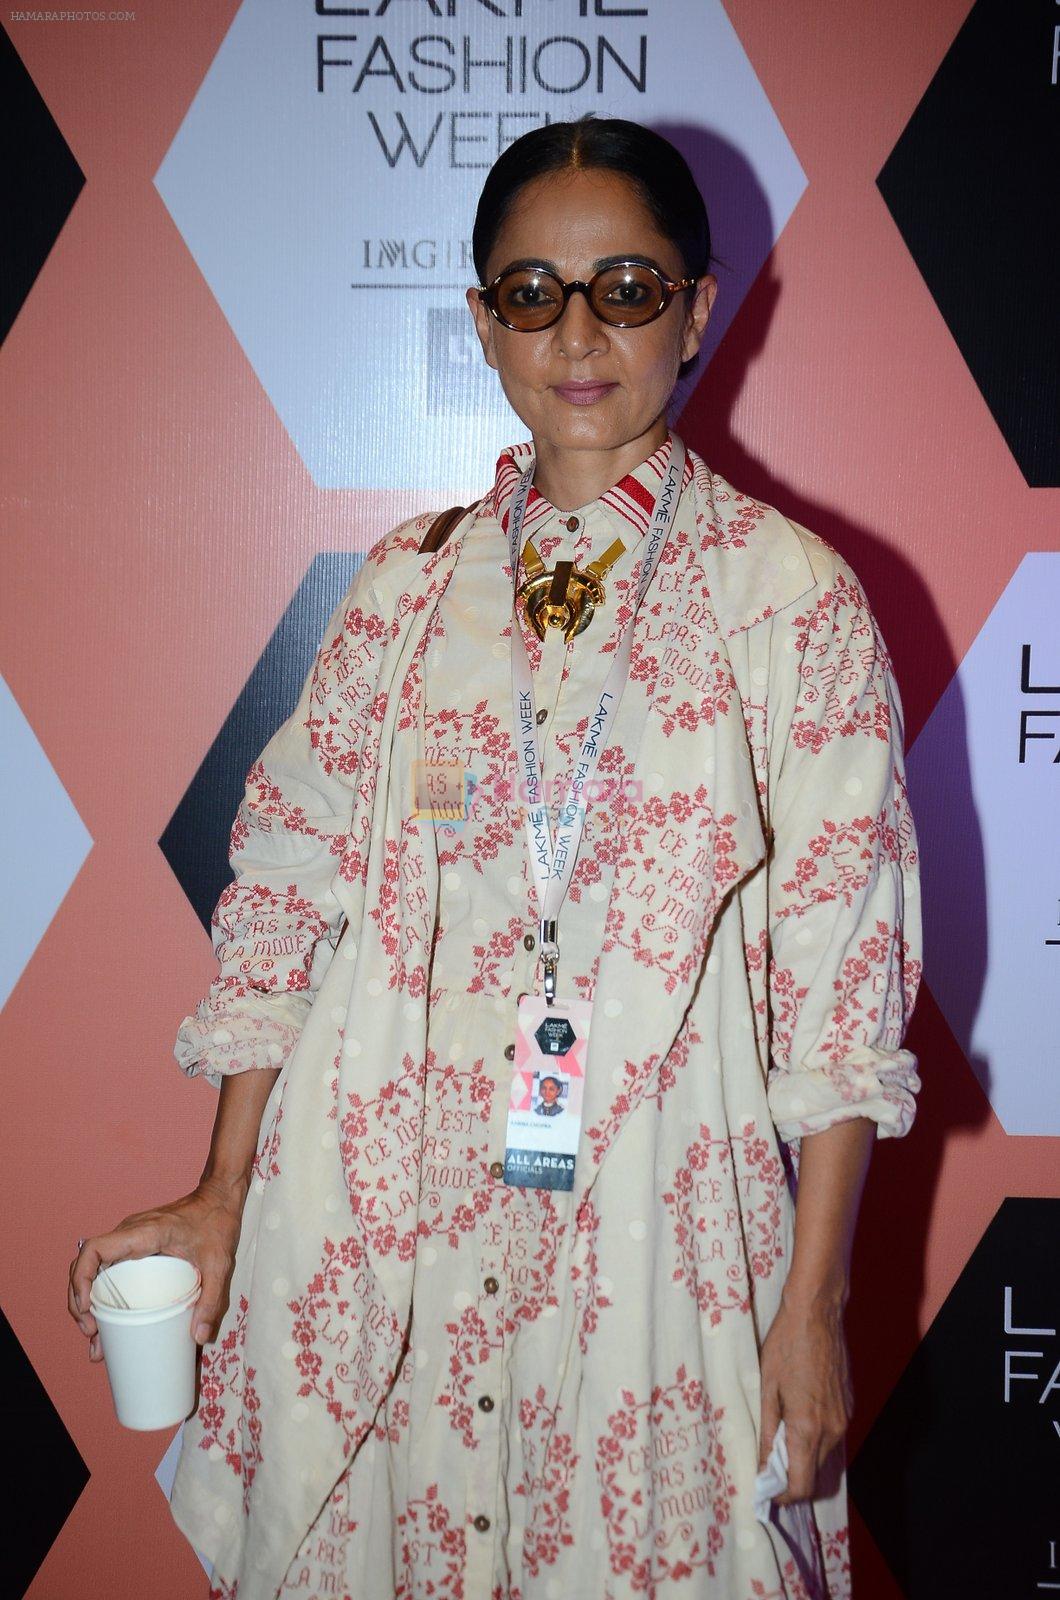 on Day 4 at Lakme Fashion Week 2016 on 2nd April 2016